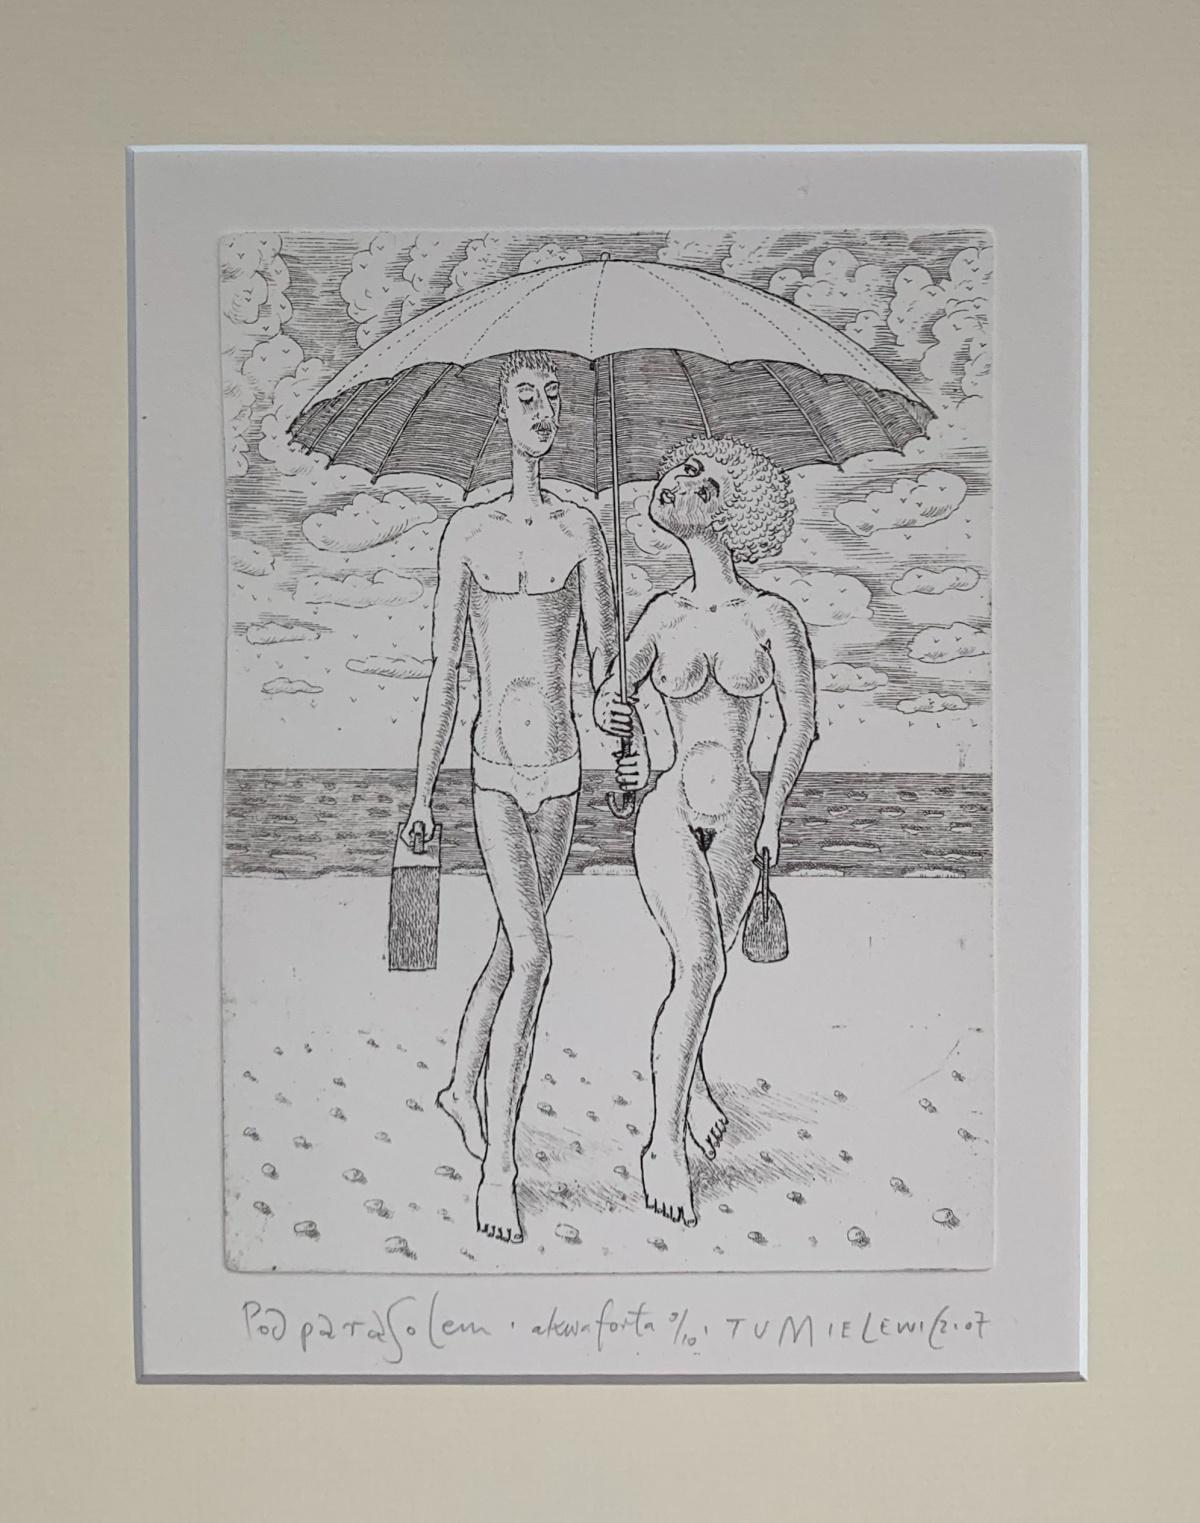 Under an umbrella - Contemporary Figurative Etching Print, Nude, Black & white - Gray Nude Print by Czeslaw Tumielewicz